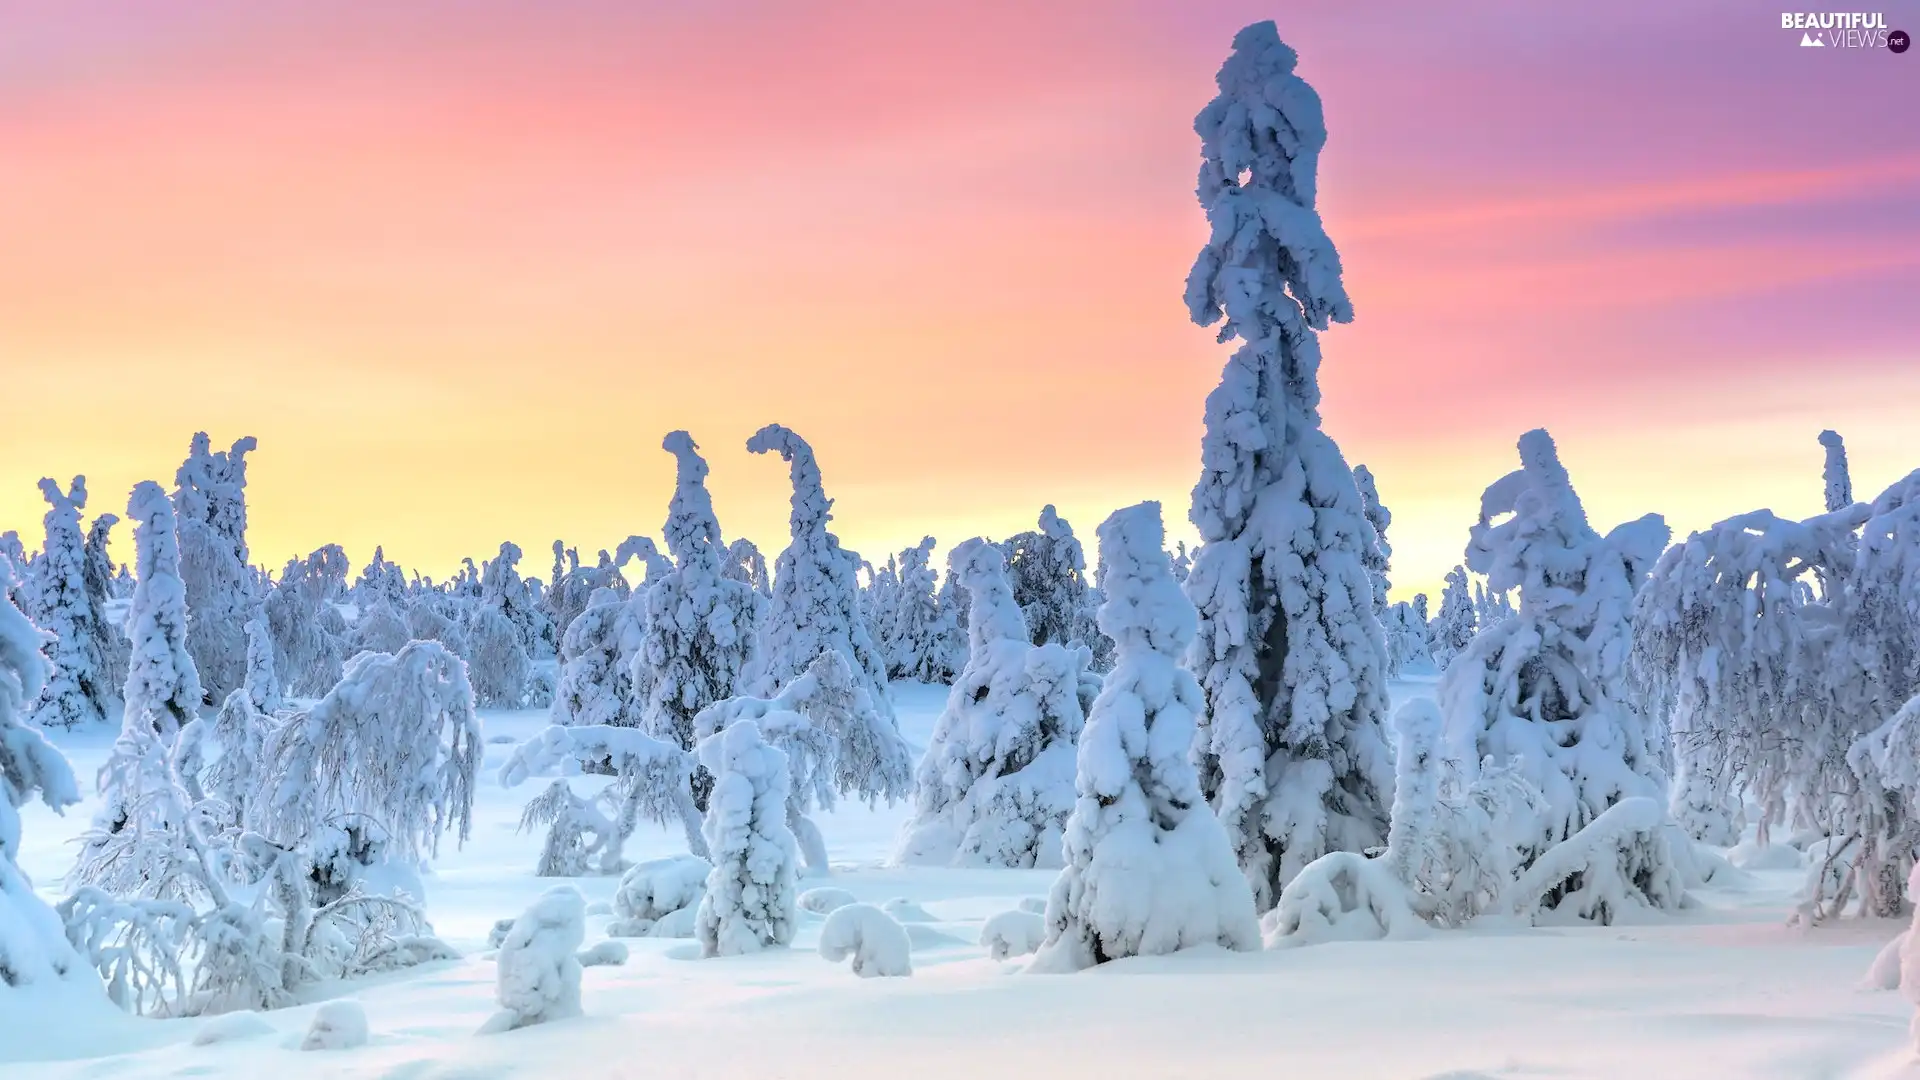 winter, Lapland, viewes, Finland, Riisitunturi National Park, trees, Snowy